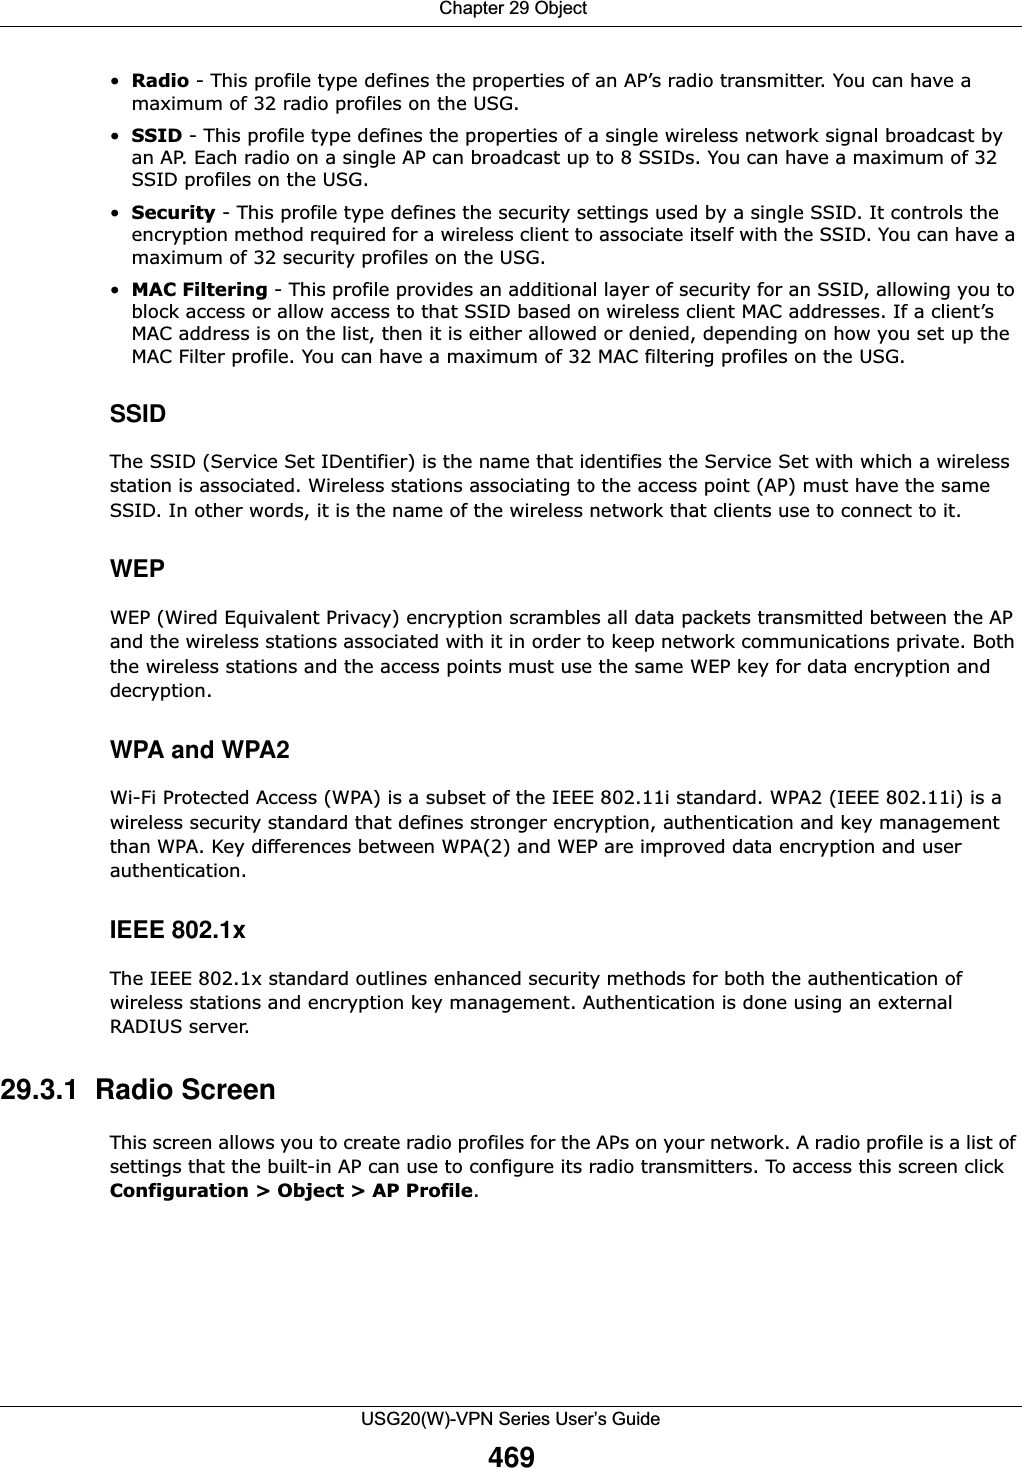  Chapter 29 ObjectUSG20(W)-VPN Series User’s Guide469•Radio - This profile type defines the properties of an AP’s radio transmitter. You can have a maximum of 32 radio profiles on the USG.•SSID - This profile type defines the properties of a single wireless network signal broadcast by an AP. Each radio on a single AP can broadcast up to 8 SSIDs. You can have a maximum of 32 SSID profiles on the USG.•Security - This profile type defines the security settings used by a single SSID. It controls the encryption method required for a wireless client to associate itself with the SSID. You can have a maximum of 32 security profiles on the USG.•MAC Filtering - This profile provides an additional layer of security for an SSID, allowing you to block access or allow access to that SSID based on wireless client MAC addresses. If a client’s MAC address is on the list, then it is either allowed or denied, depending on how you set up the MAC Filter profile. You can have a maximum of 32 MAC filtering profiles on the USG.SSIDThe SSID (Service Set IDentifier) is the name that identifies the Service Set with which a wireless station is associated. Wireless stations associating to the access point (AP) must have the same SSID. In other words, it is the name of the wireless network that clients use to connect to it.WEPWEP (Wired Equivalent Privacy) encryption scrambles all data packets transmitted between the AP and the wireless stations associated with it in order to keep network communications private. Both the wireless stations and the access points must use the same WEP key for data encryption and decryption.WPA and WPA2Wi-Fi Protected Access (WPA) is a subset of the IEEE 802.11i standard. WPA2 (IEEE 802.11i) is a wireless security standard that defines stronger encryption, authentication and key management than WPA. Key differences between WPA(2) and WEP are improved data encryption and user authentication.IEEE 802.1x The IEEE 802.1x standard outlines enhanced security methods for both the authentication of wireless stations and encryption key management. Authentication is done using an external RADIUS server. 29.3.1  Radio Screen This screen allows you to create radio profiles for the APs on your network. A radio profile is a list of settings that the built-in AP can use to configure its radio transmitters. To access this screen click Configuration &gt; Object &gt; AP Profile. 